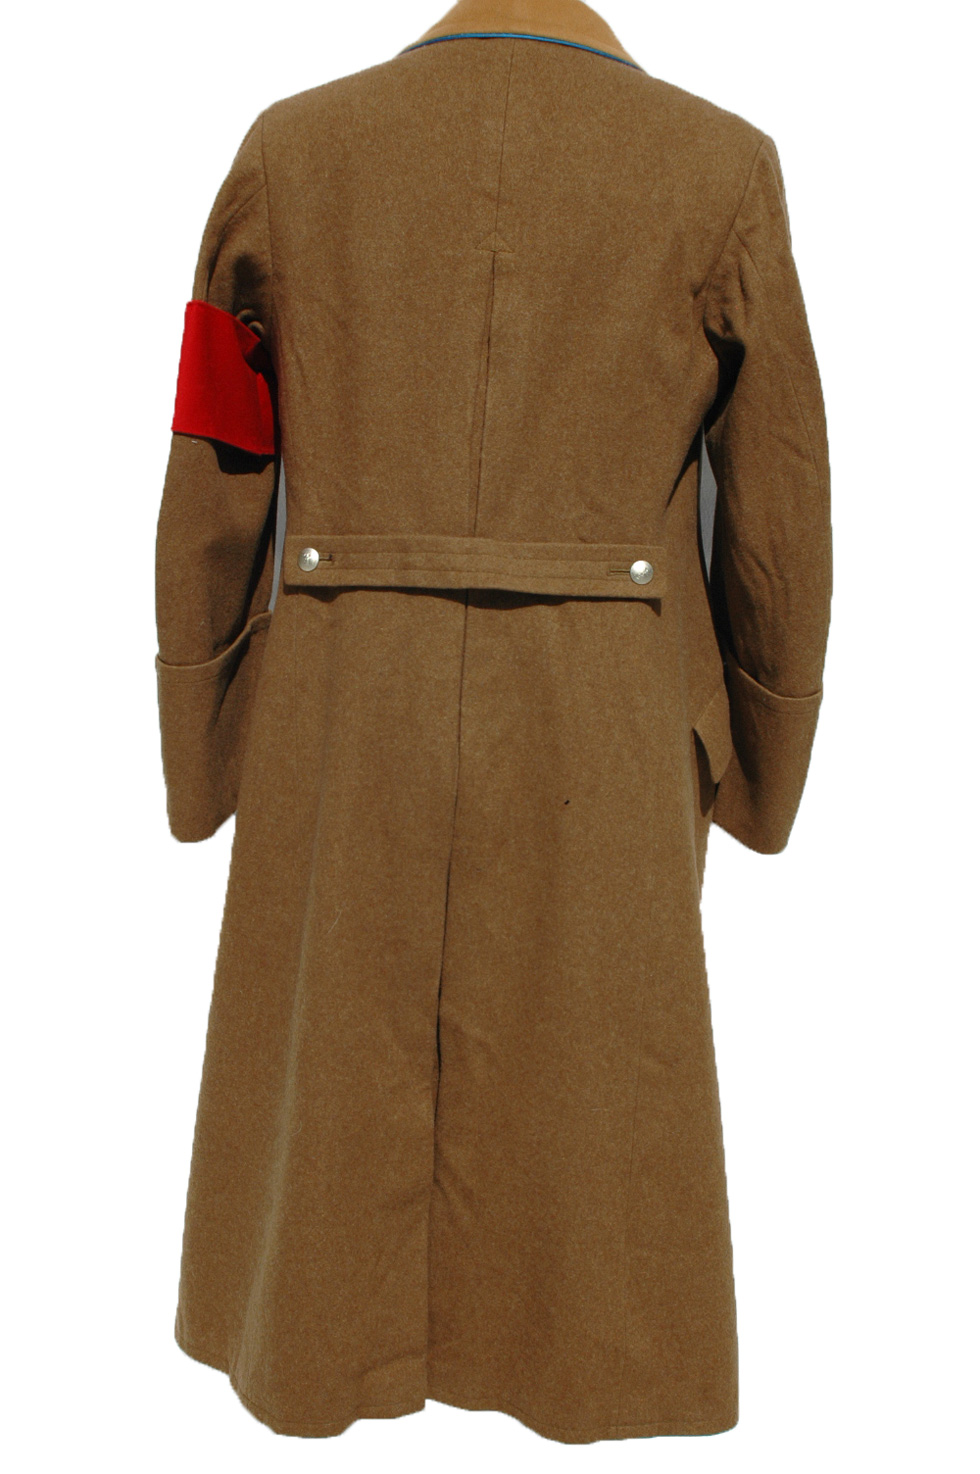 NSDAP Early Political Leaders Greatcoat